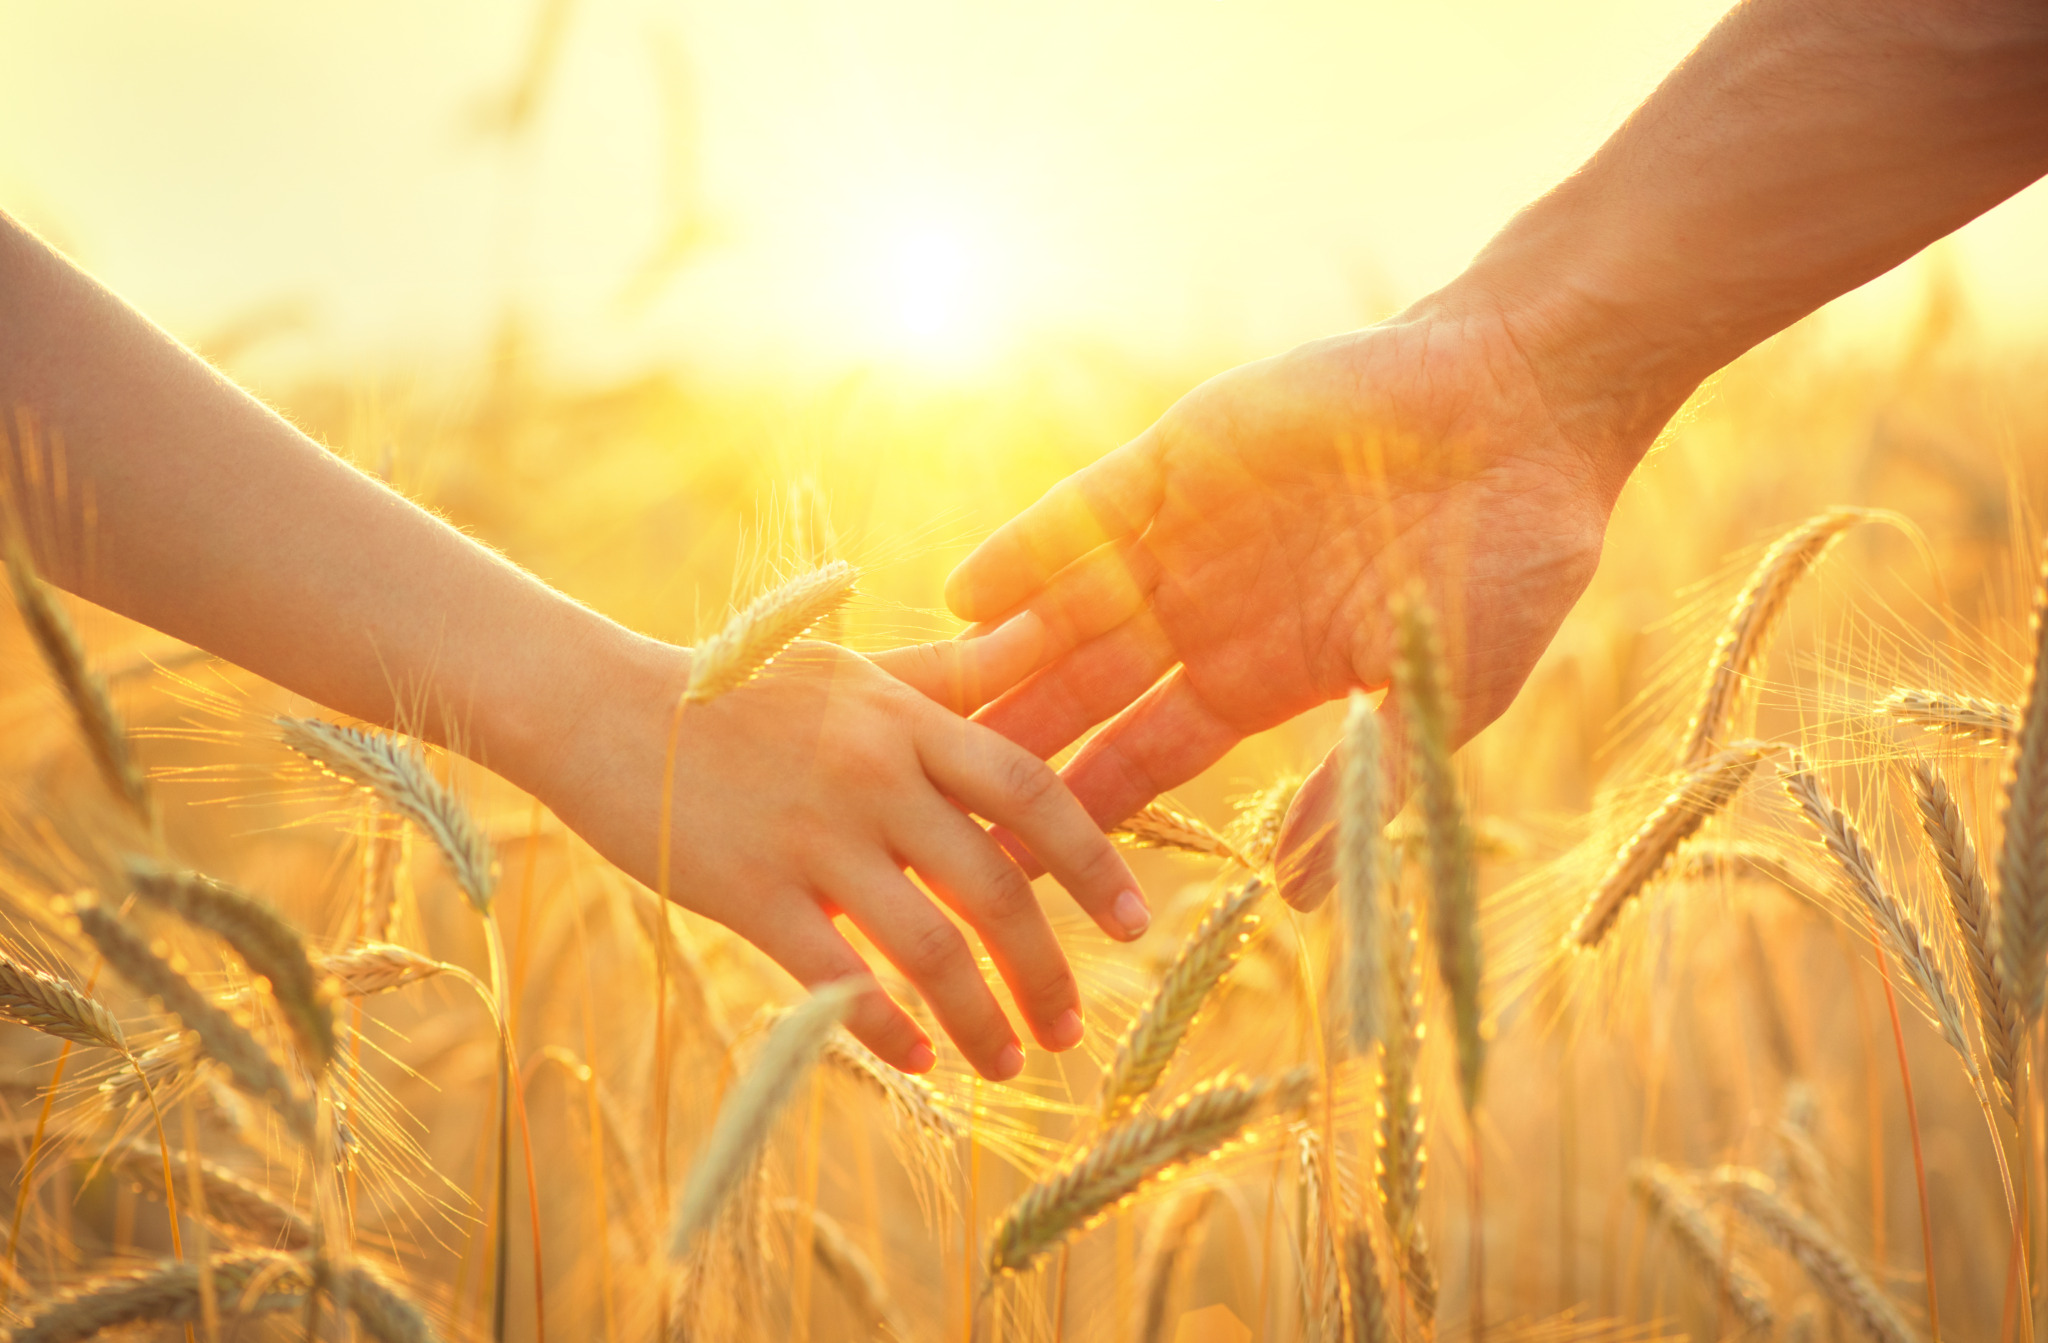 Couple,Taking,Hands,And,Walking,On,Golden,Wheat,Field,Over